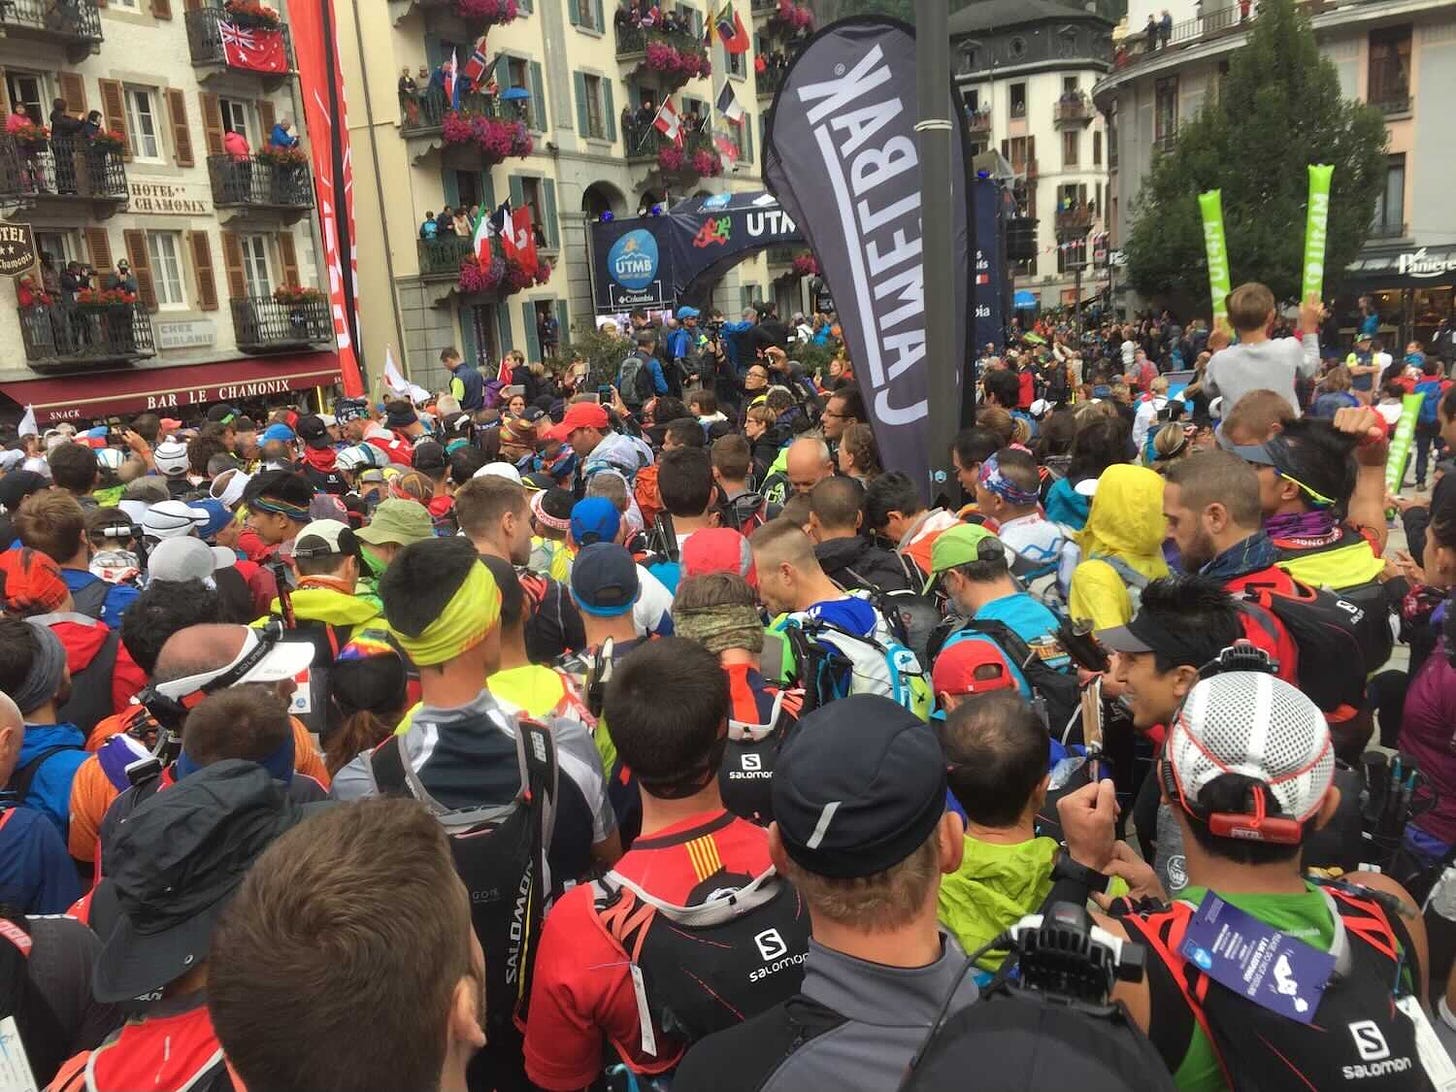 My view at the start.